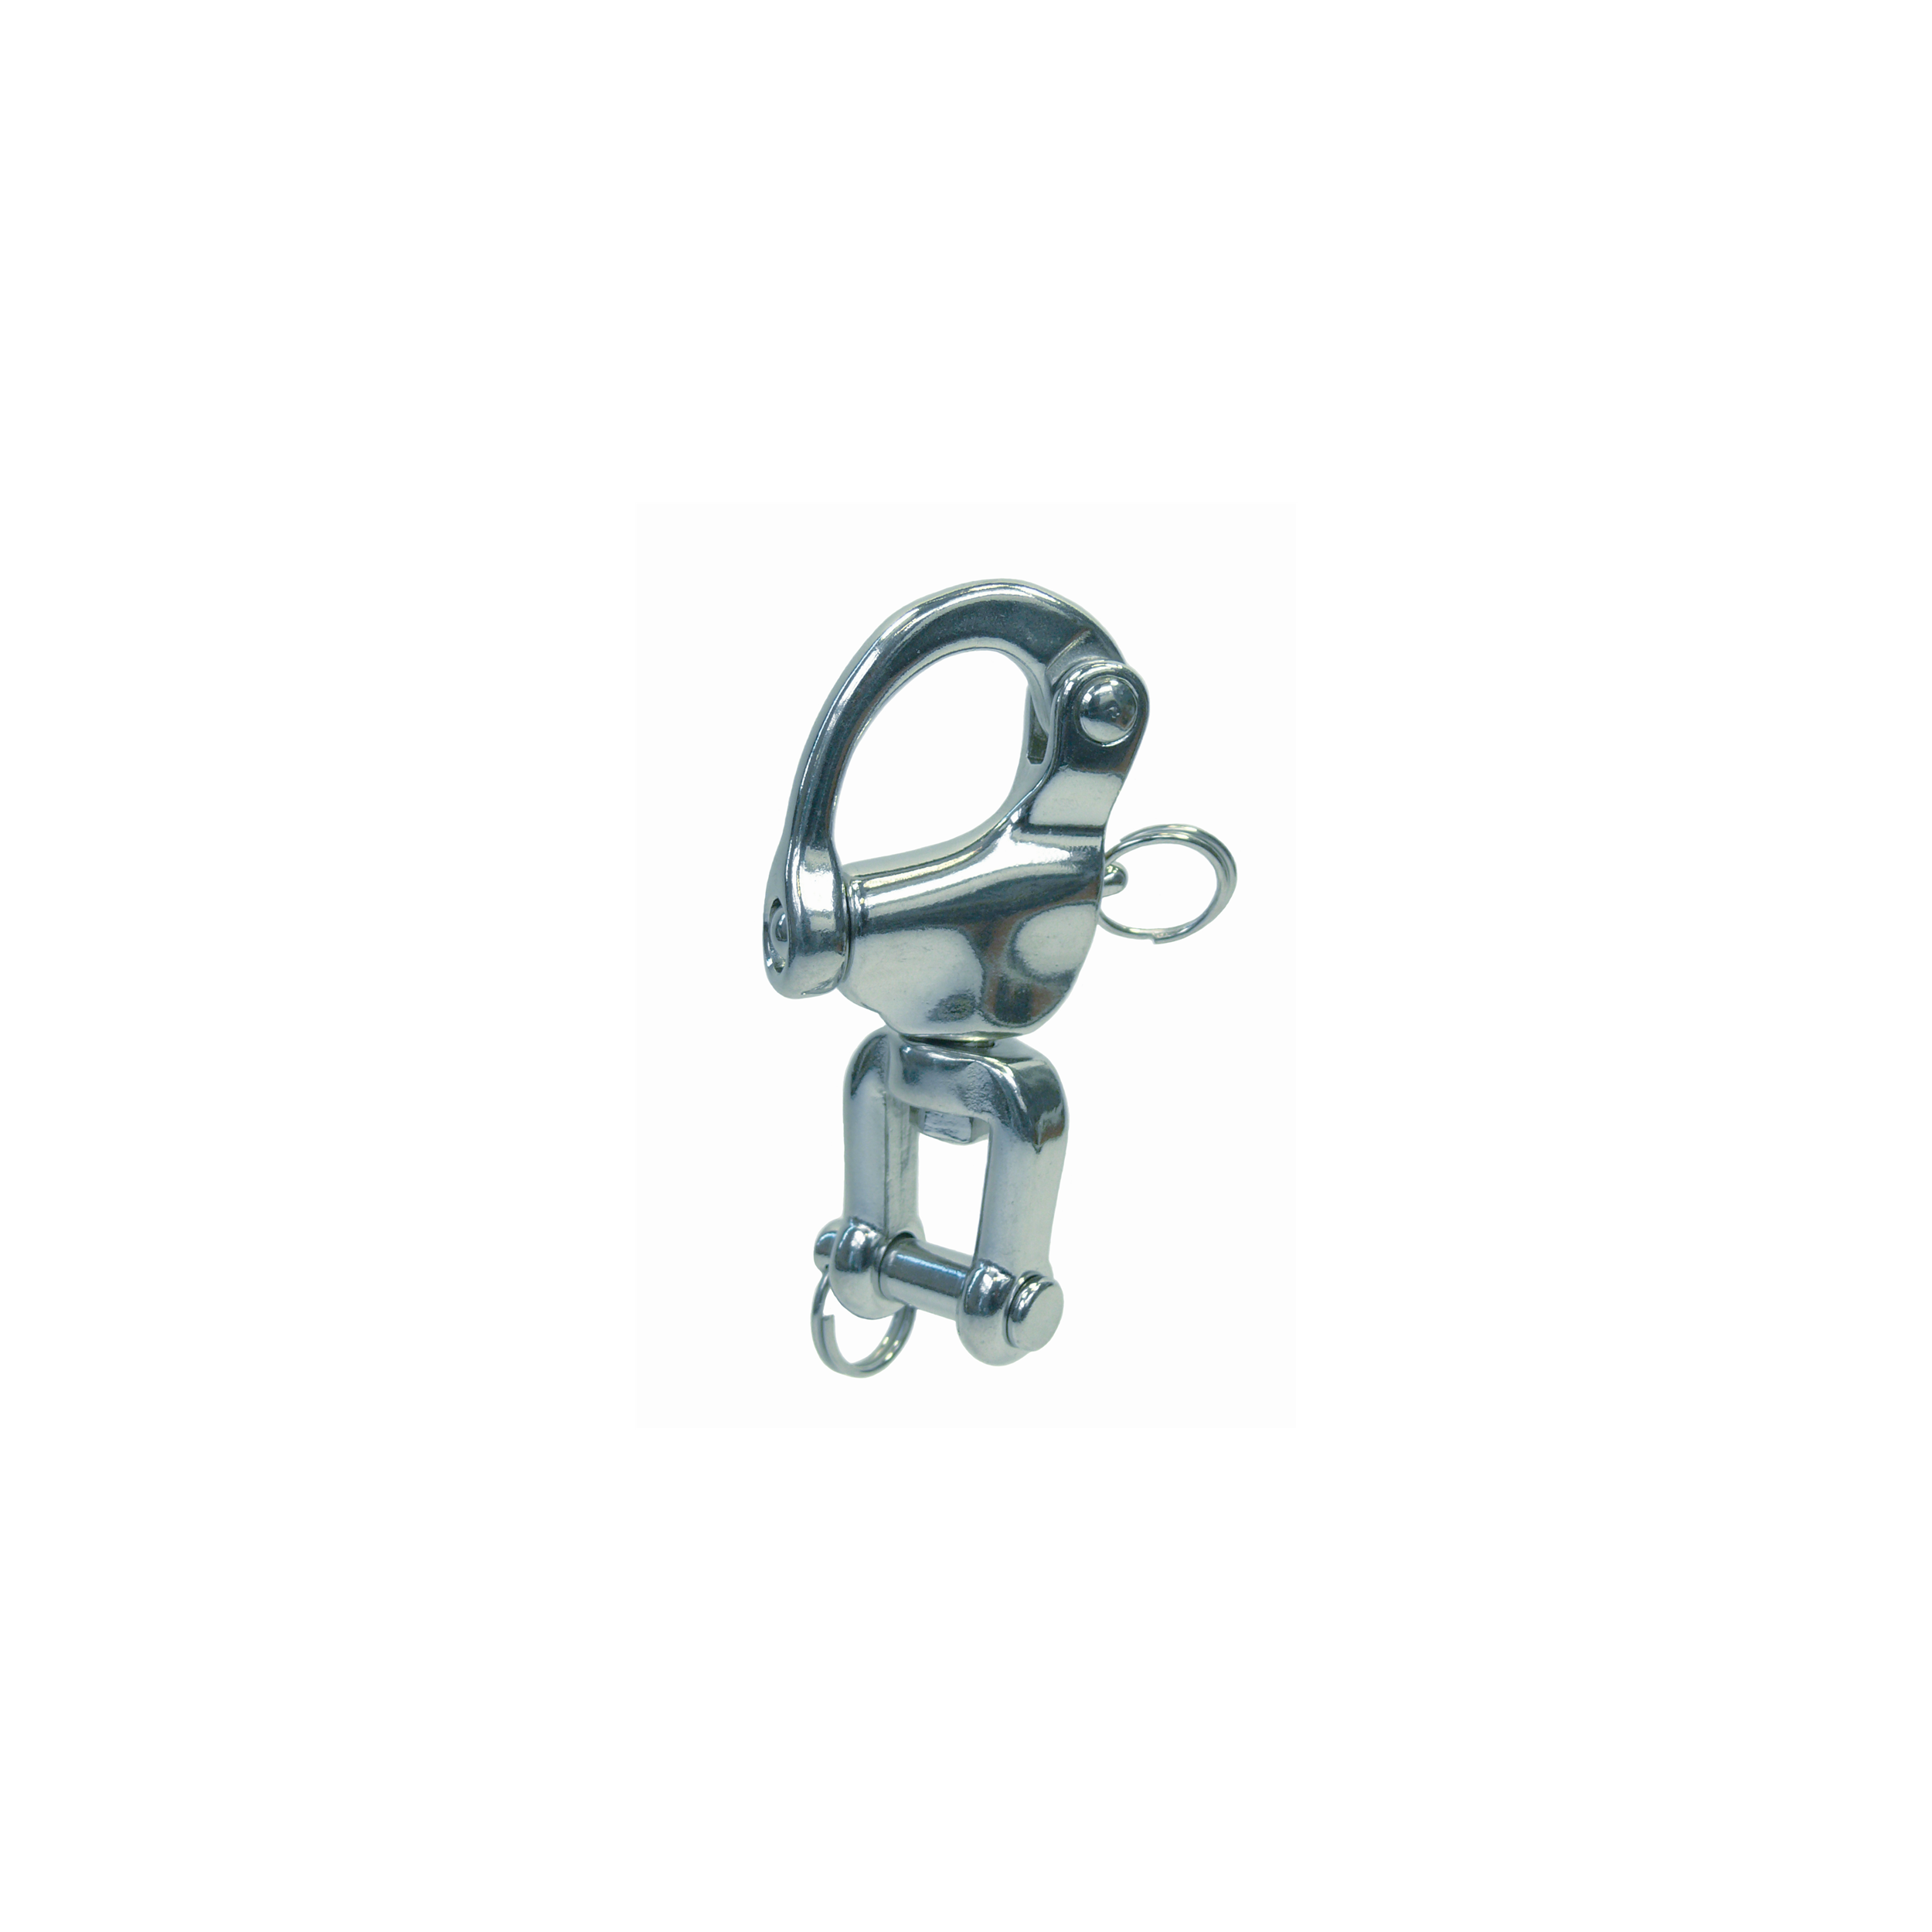 Snap shackle with swivel shackle A4  68mm